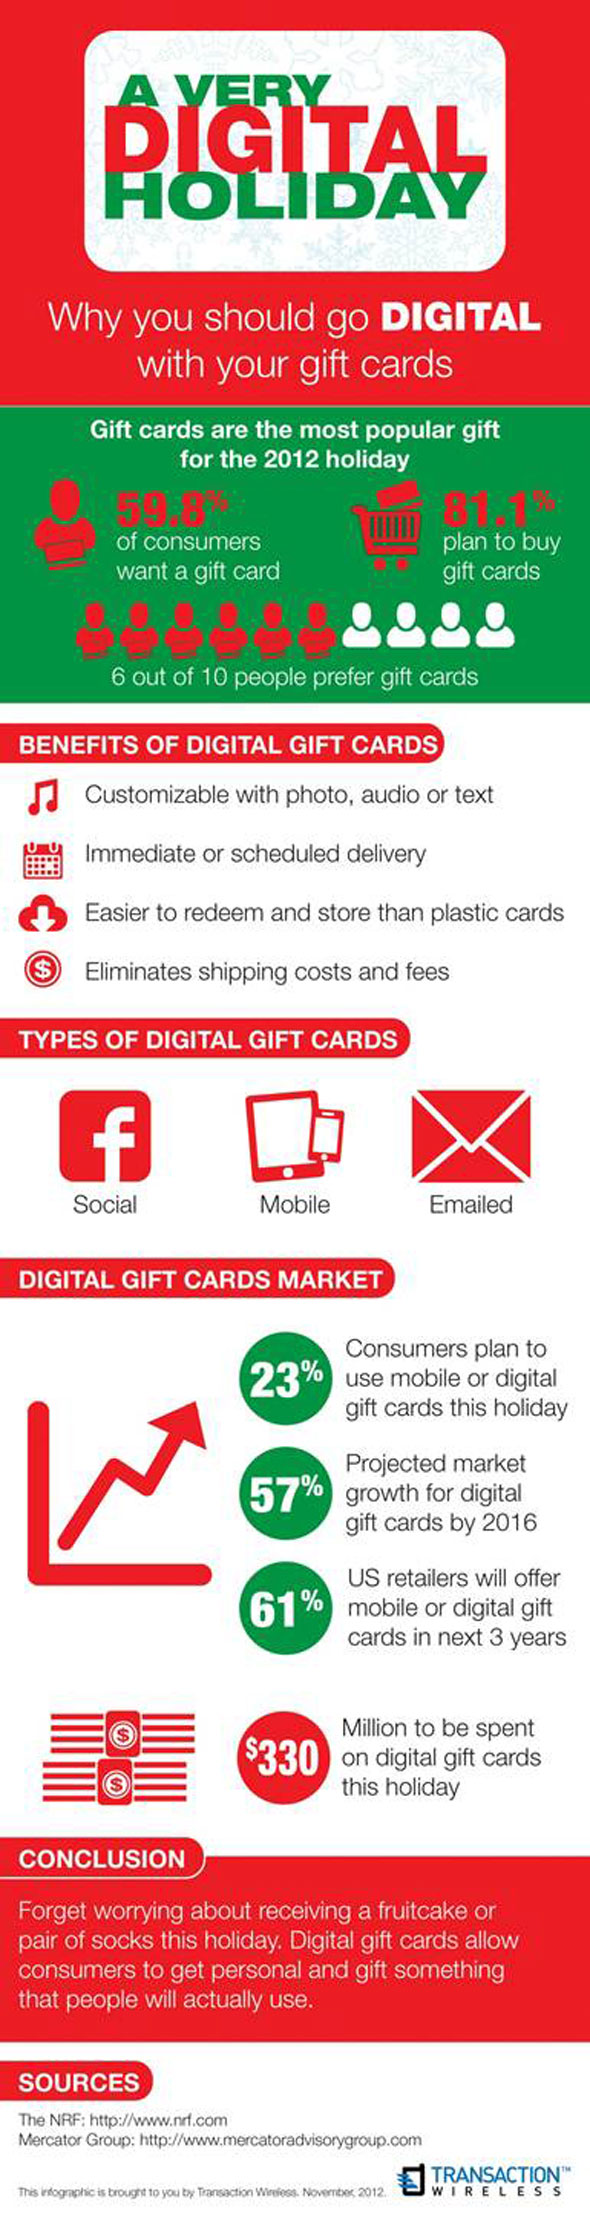 infographic holiday giftcards